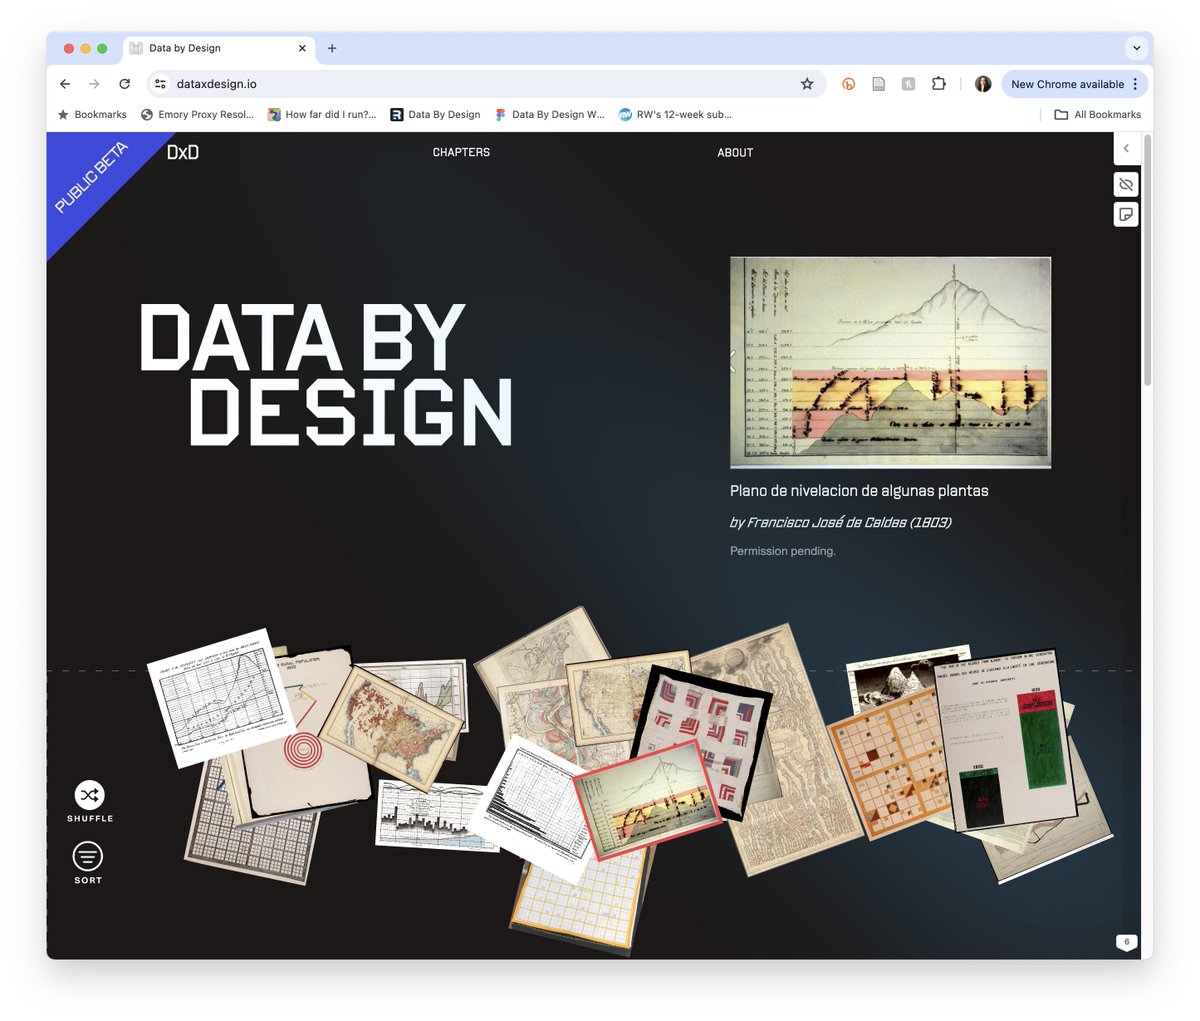 I am beyond thrilled to share that DATA BY DESIGN: AN INTERACTIVE HISTORY OF DATA VISUALIZATION, 1789-1900 is now open for community review at dataxdesign.io. It's the work of 15+ people across 5 institutions, 2 continents, 2 babies, and a global pandemic. A🧵but first: